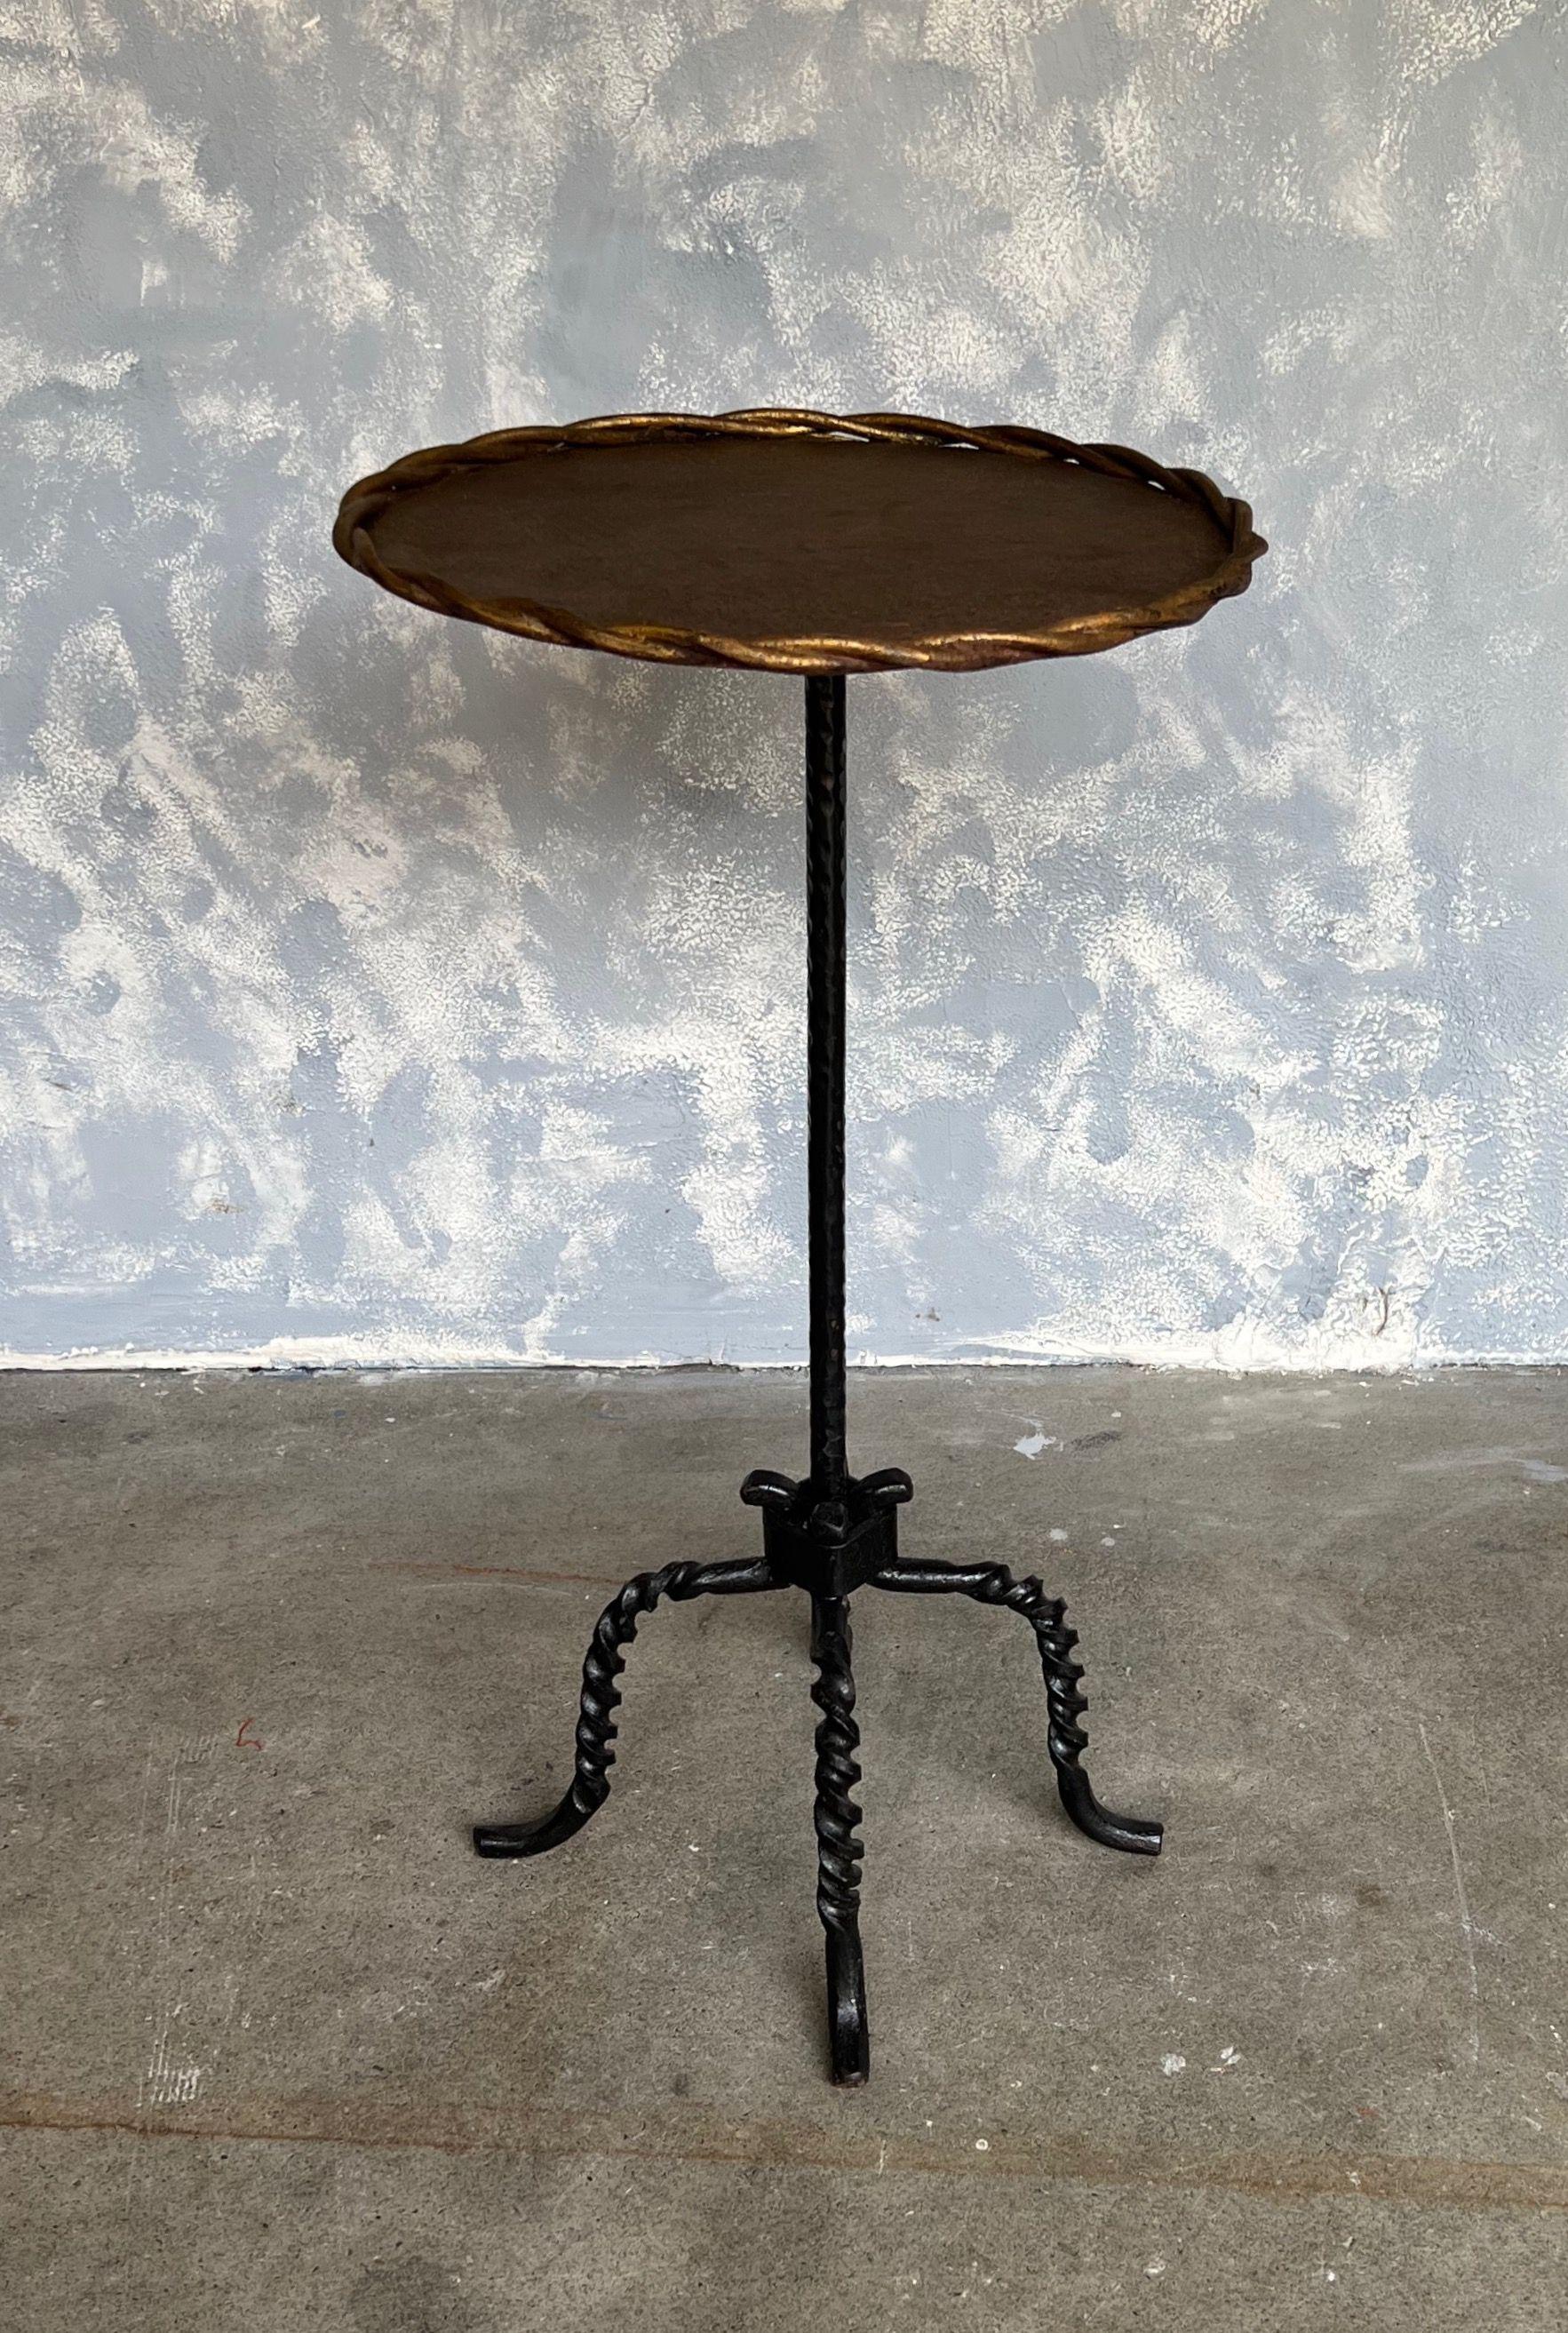 This distinctive drinks table features an extraordinary tripod design with heavily twisted legs in a dark painted finish. The table is designed with a circular central stem that supports a round top, encased by a double braided frame, ensuring your